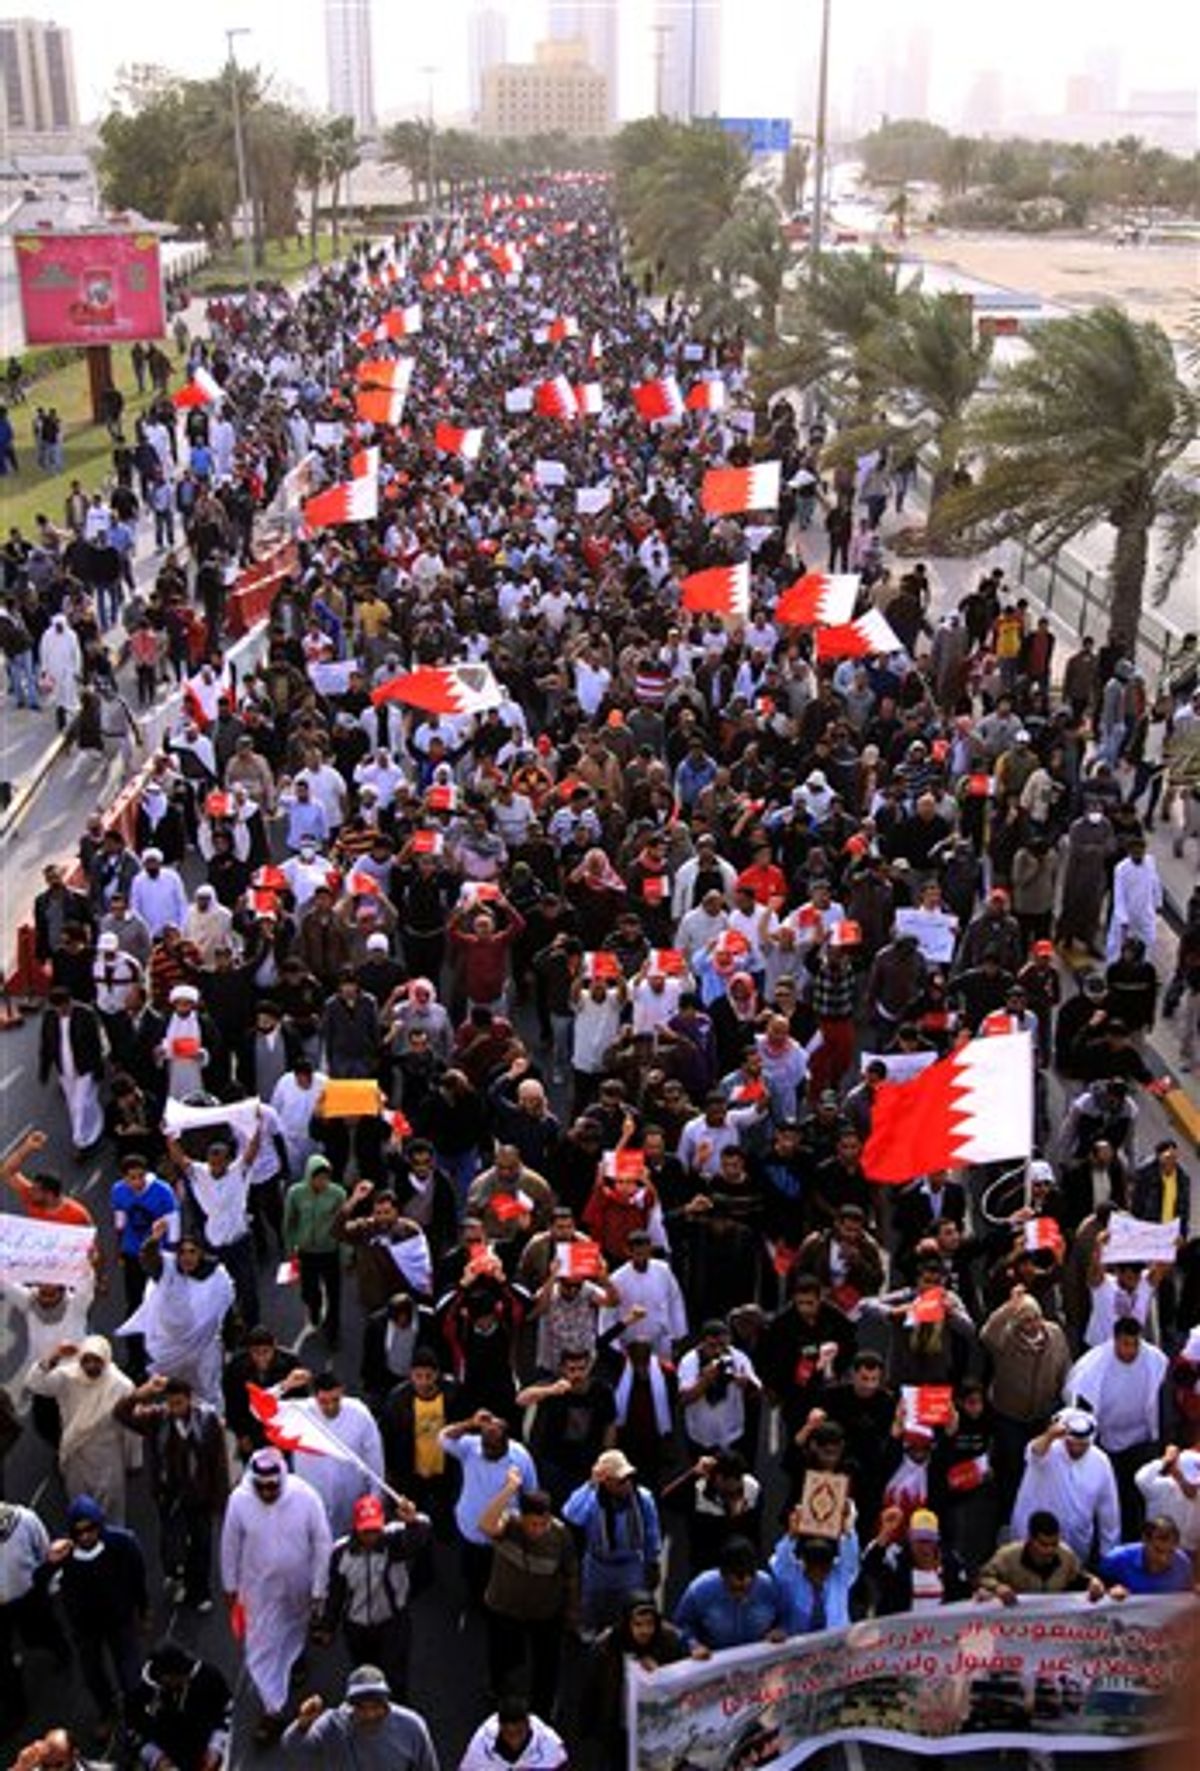 Thousands of anti-government protesters march Tuesday, March 15, 2011, to the Saudi embassy in Manama, Bahrain. Bahrain's king declared a three-month state of emergency Tuesday to quell a Shiite uprising, as clashes spread through the capital and surrounding villages in a showdown that drew in the region's major powers and splintered along its main sectarian faultlines. At least two Bahrainis and a Saudi soldier died, and hundreds of protesters were injured by shotgun blasts and clubs. (AP Photo/Hasan Jamali) (AP)